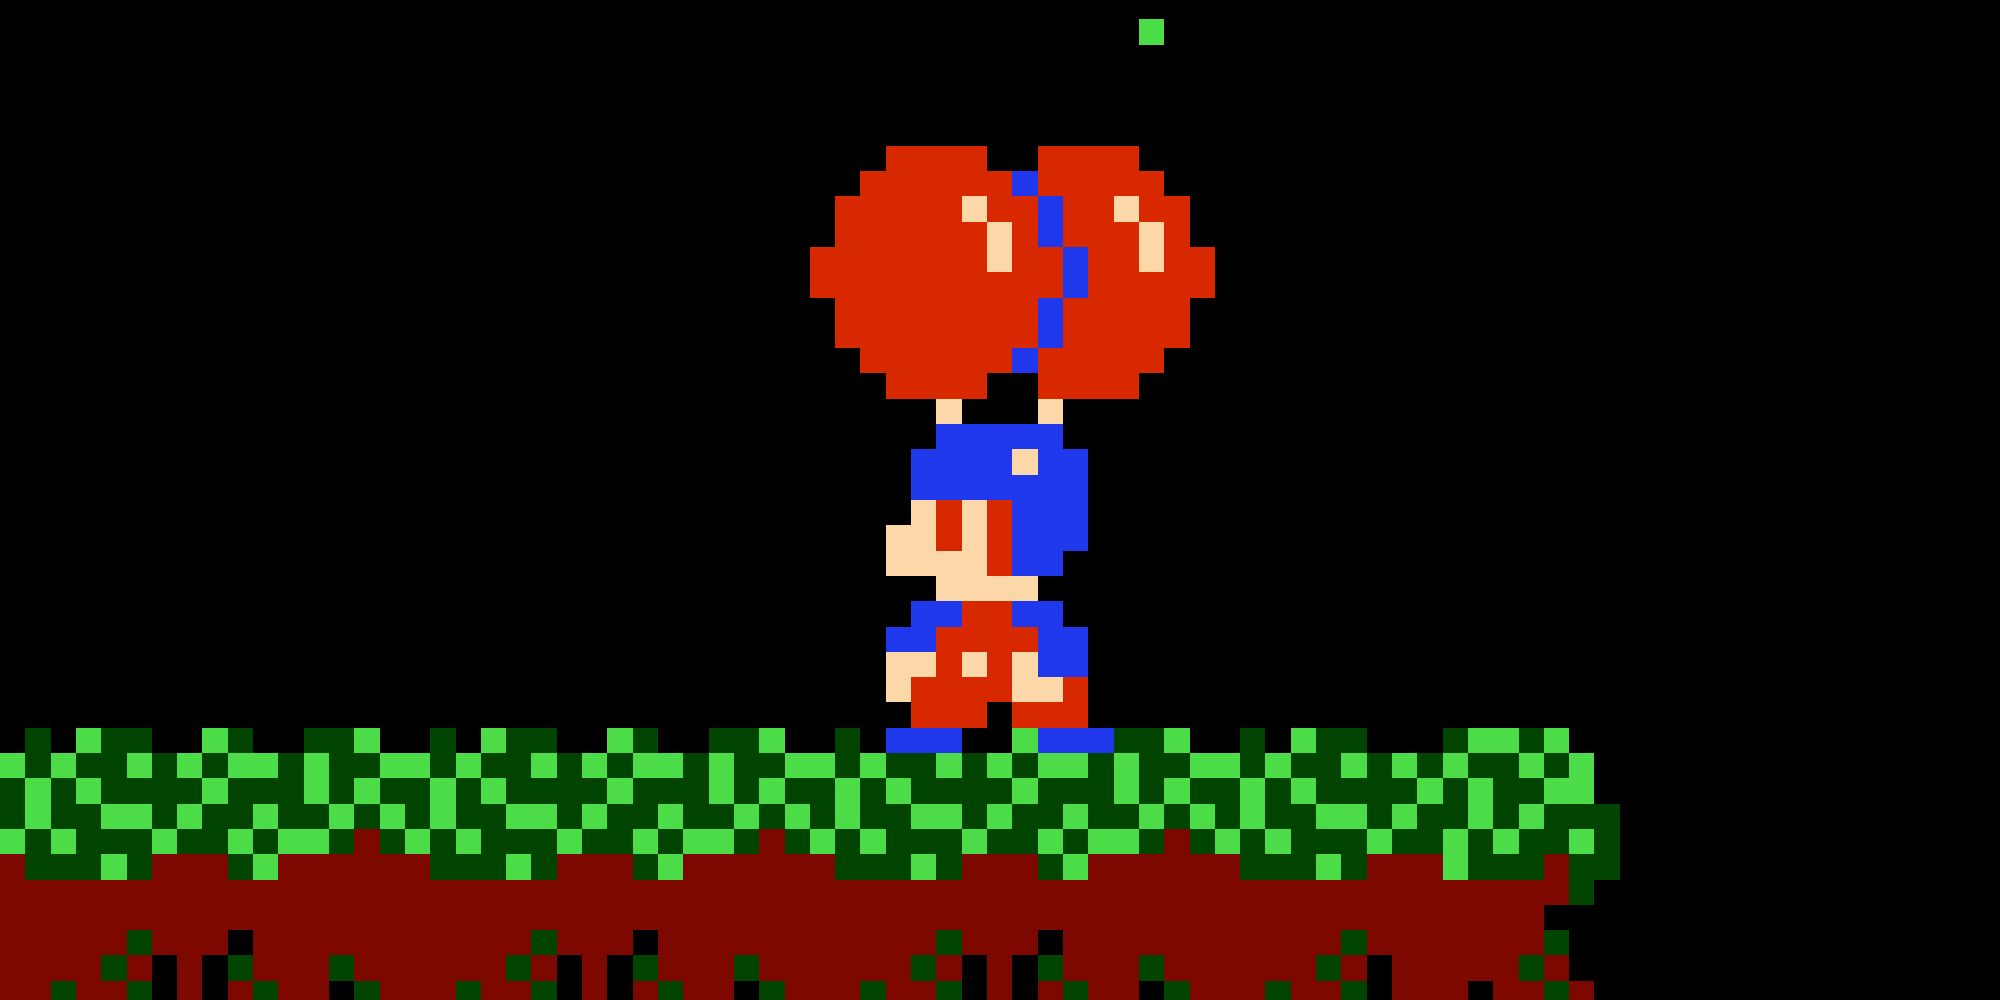 A grounded Balloon Fighter in Balloon Fight for NES